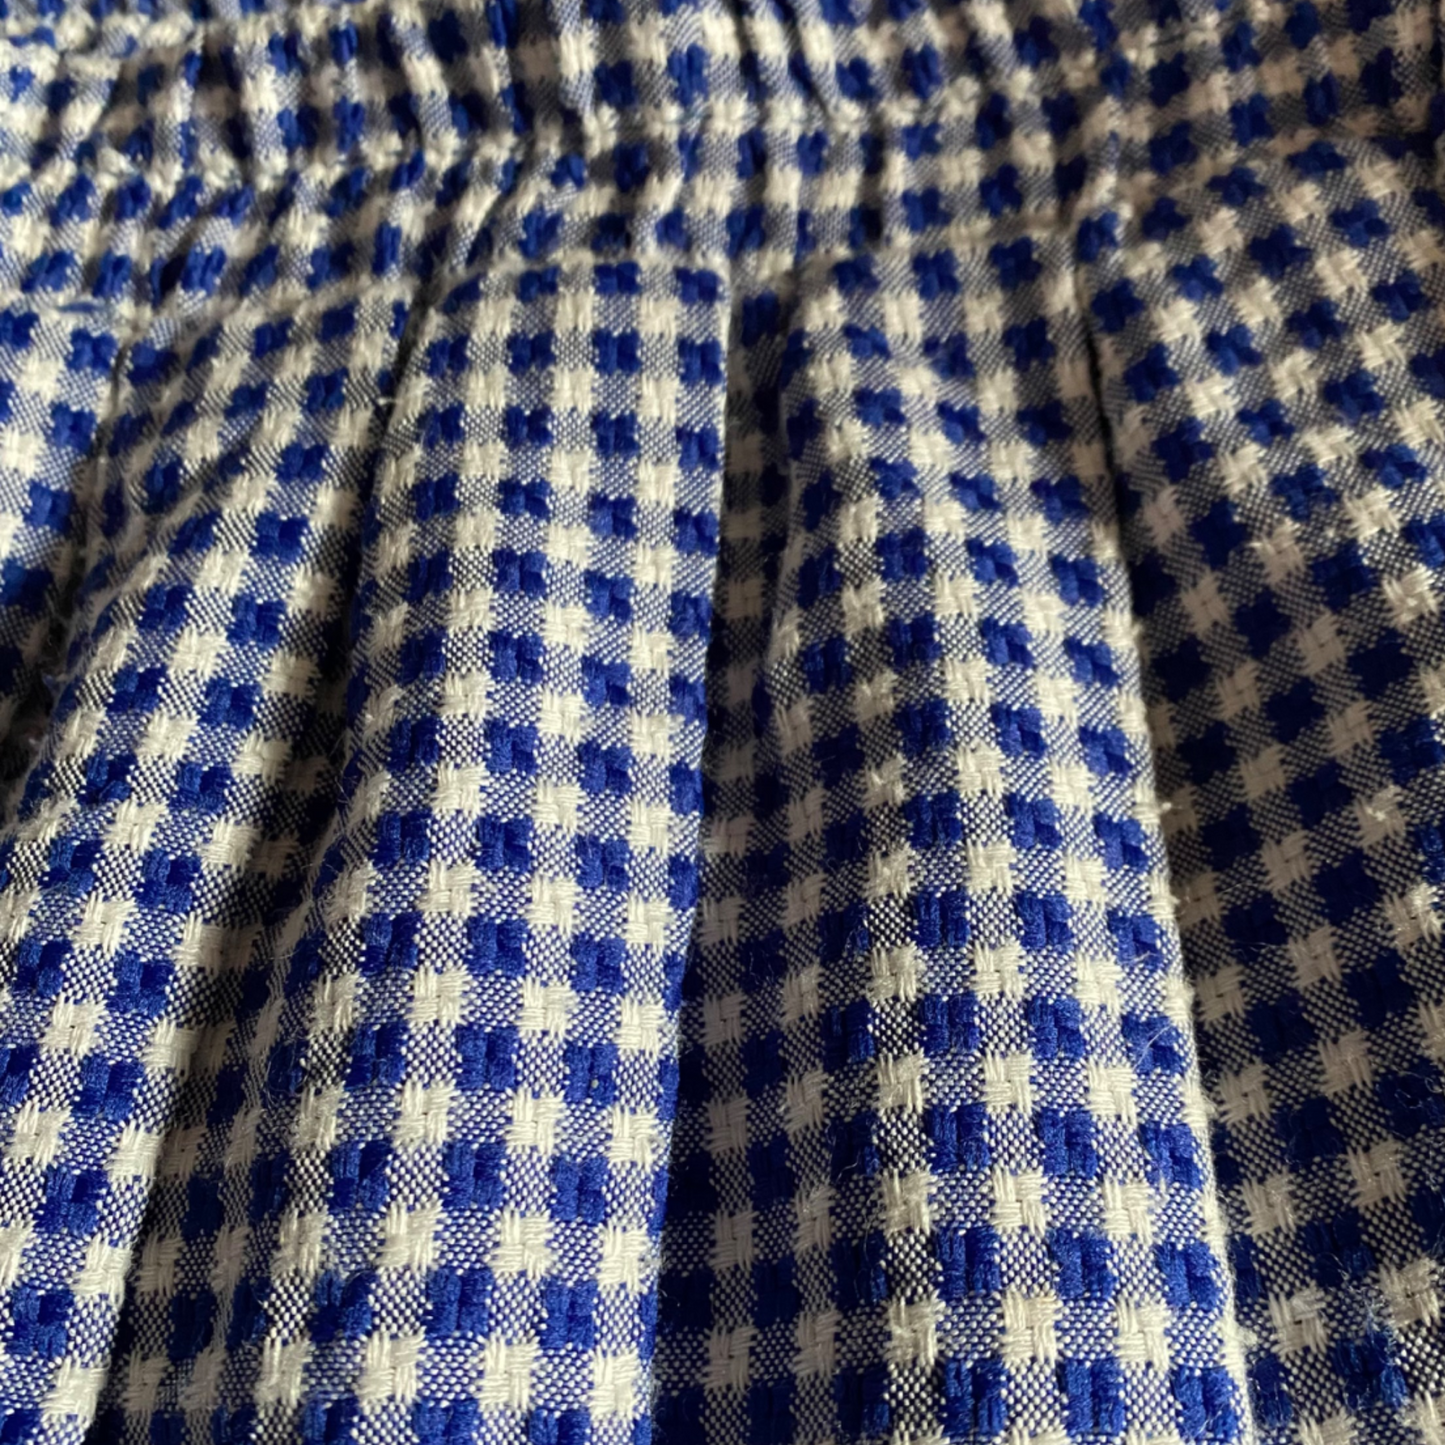 Chic and stylish textured gingham skirt - close up rayon/ polyester fabric view 